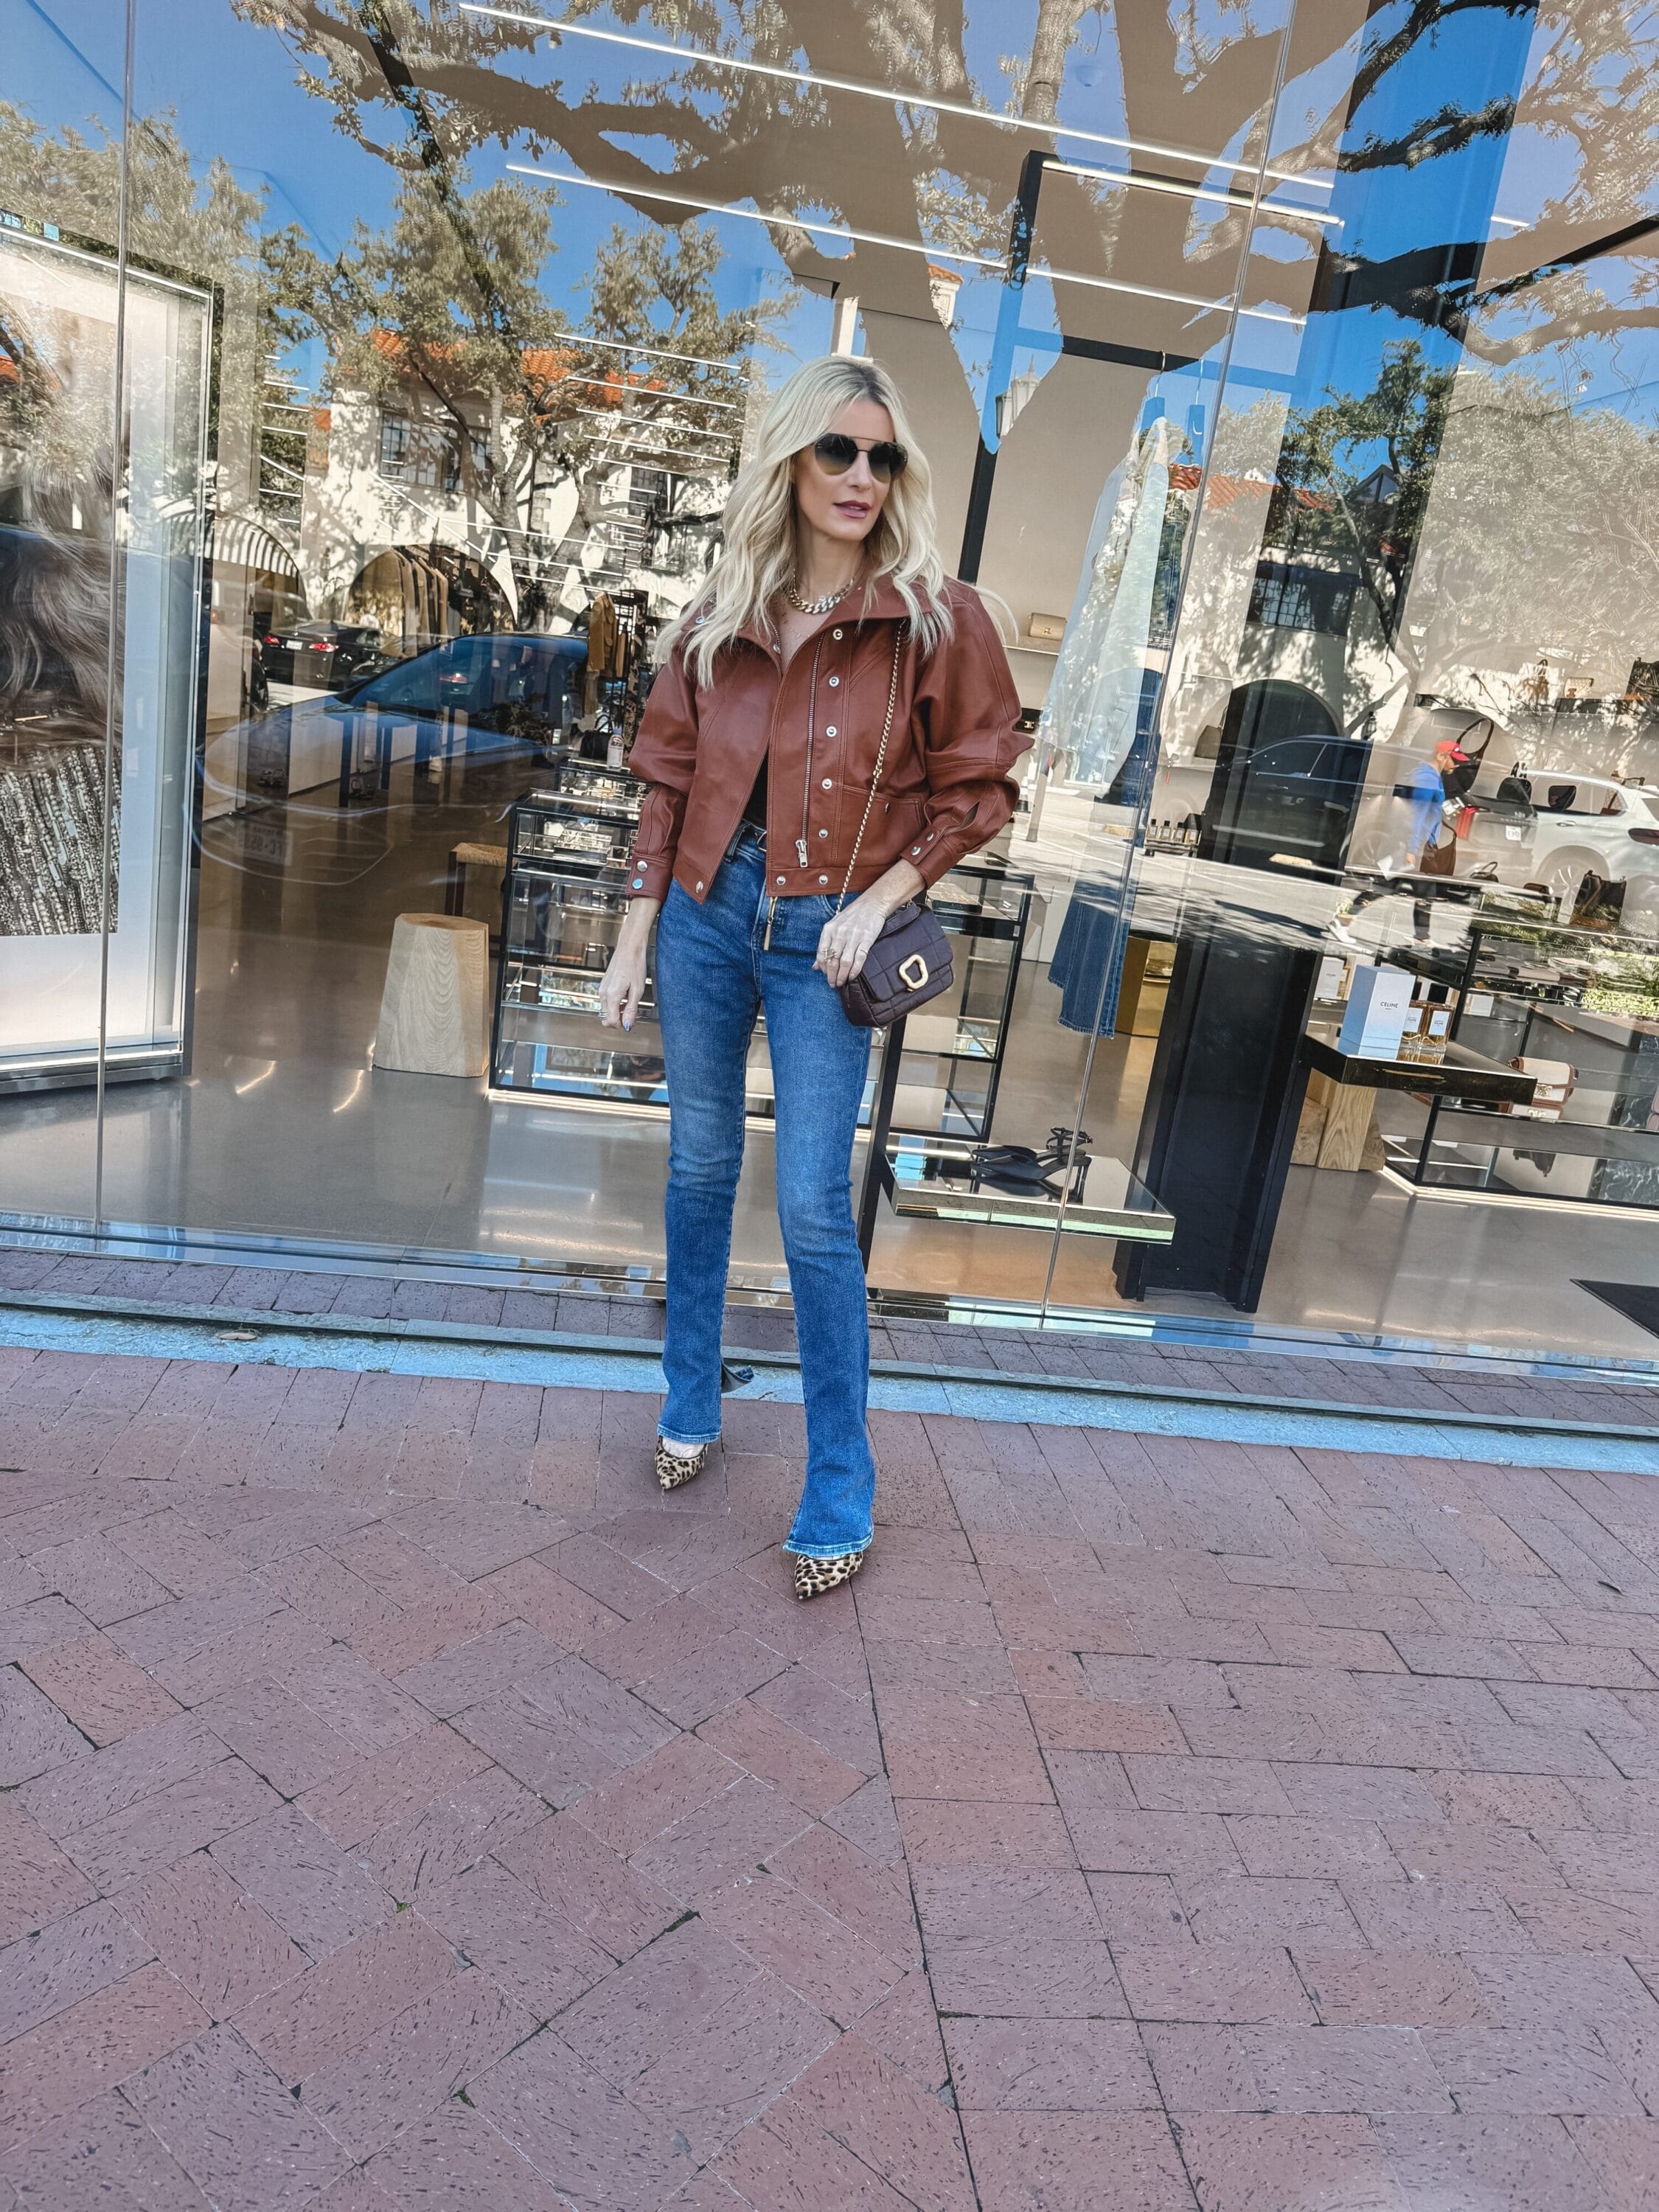 All Things Denim In Women's Fashion - Chic Over 50